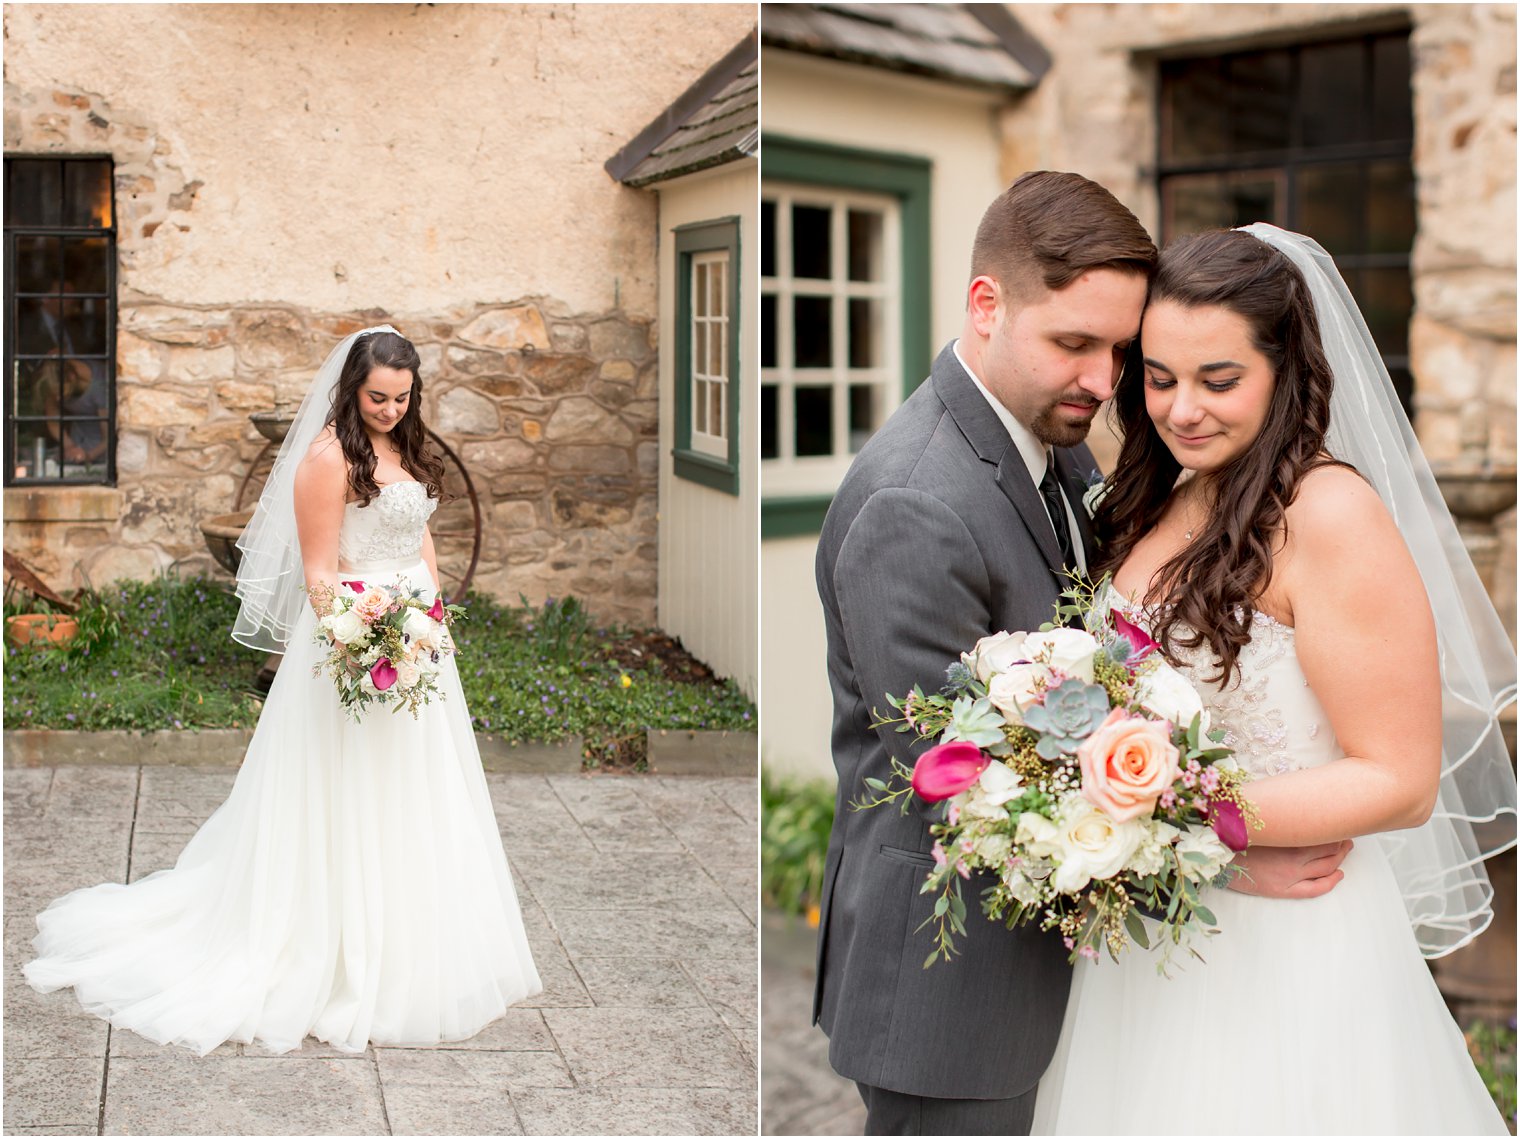 Romantic bride and groom photos at Holly Hedge Estate | Photo by PA Wedding Photographers Idalia Photography